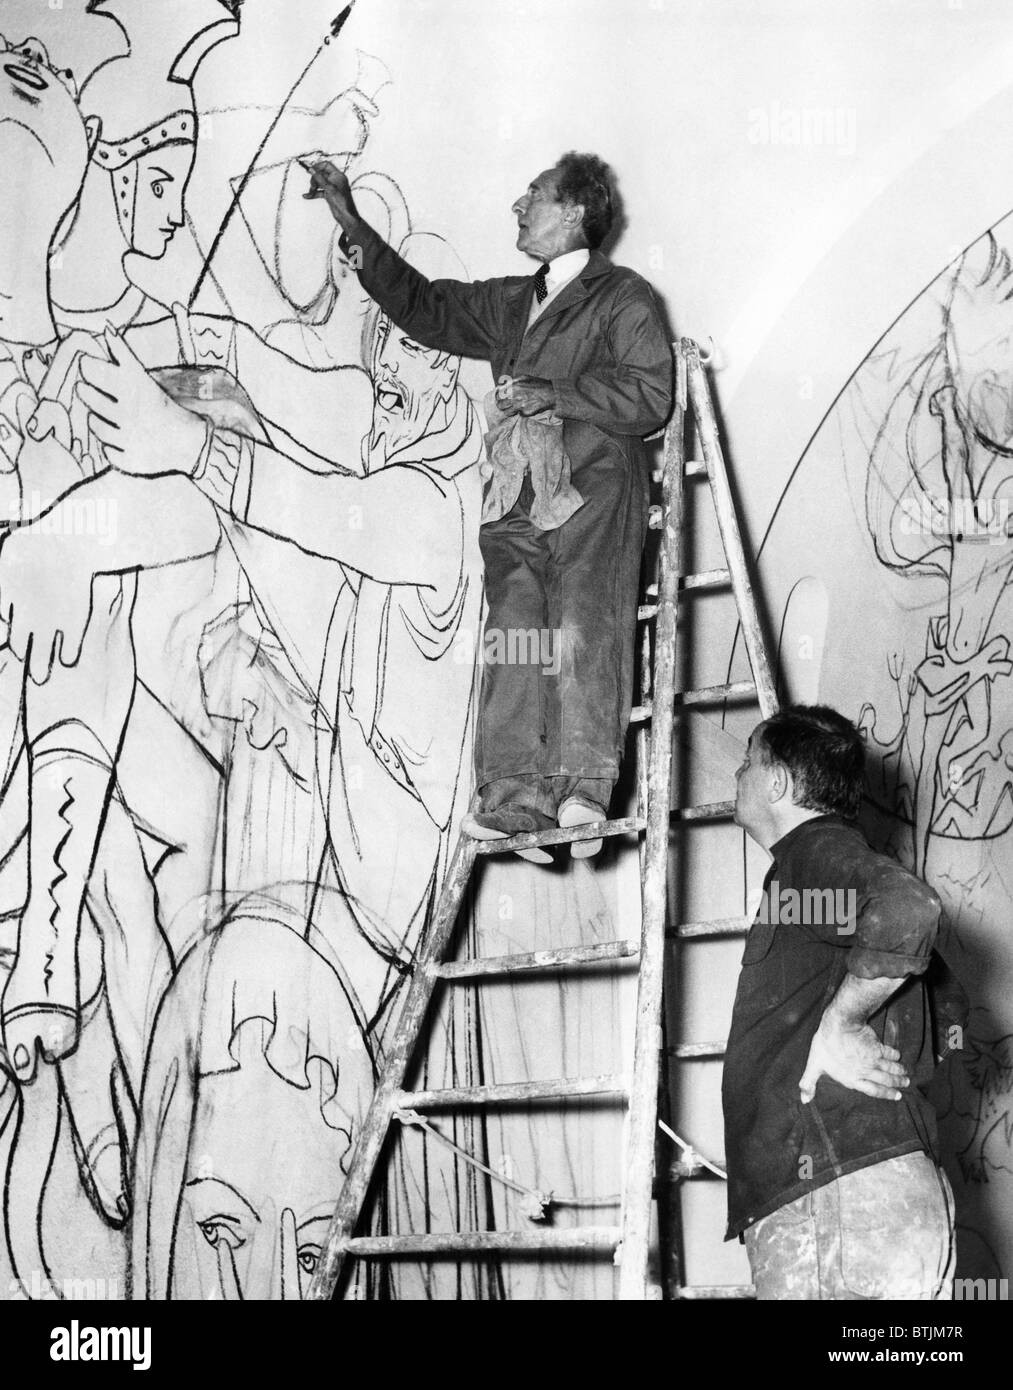 Jean Cocteau works on the mural of the life of St. Peter in St. Peter's Chapel, Villefranche, France. Painter Jean Paul Brusset Stock Photo